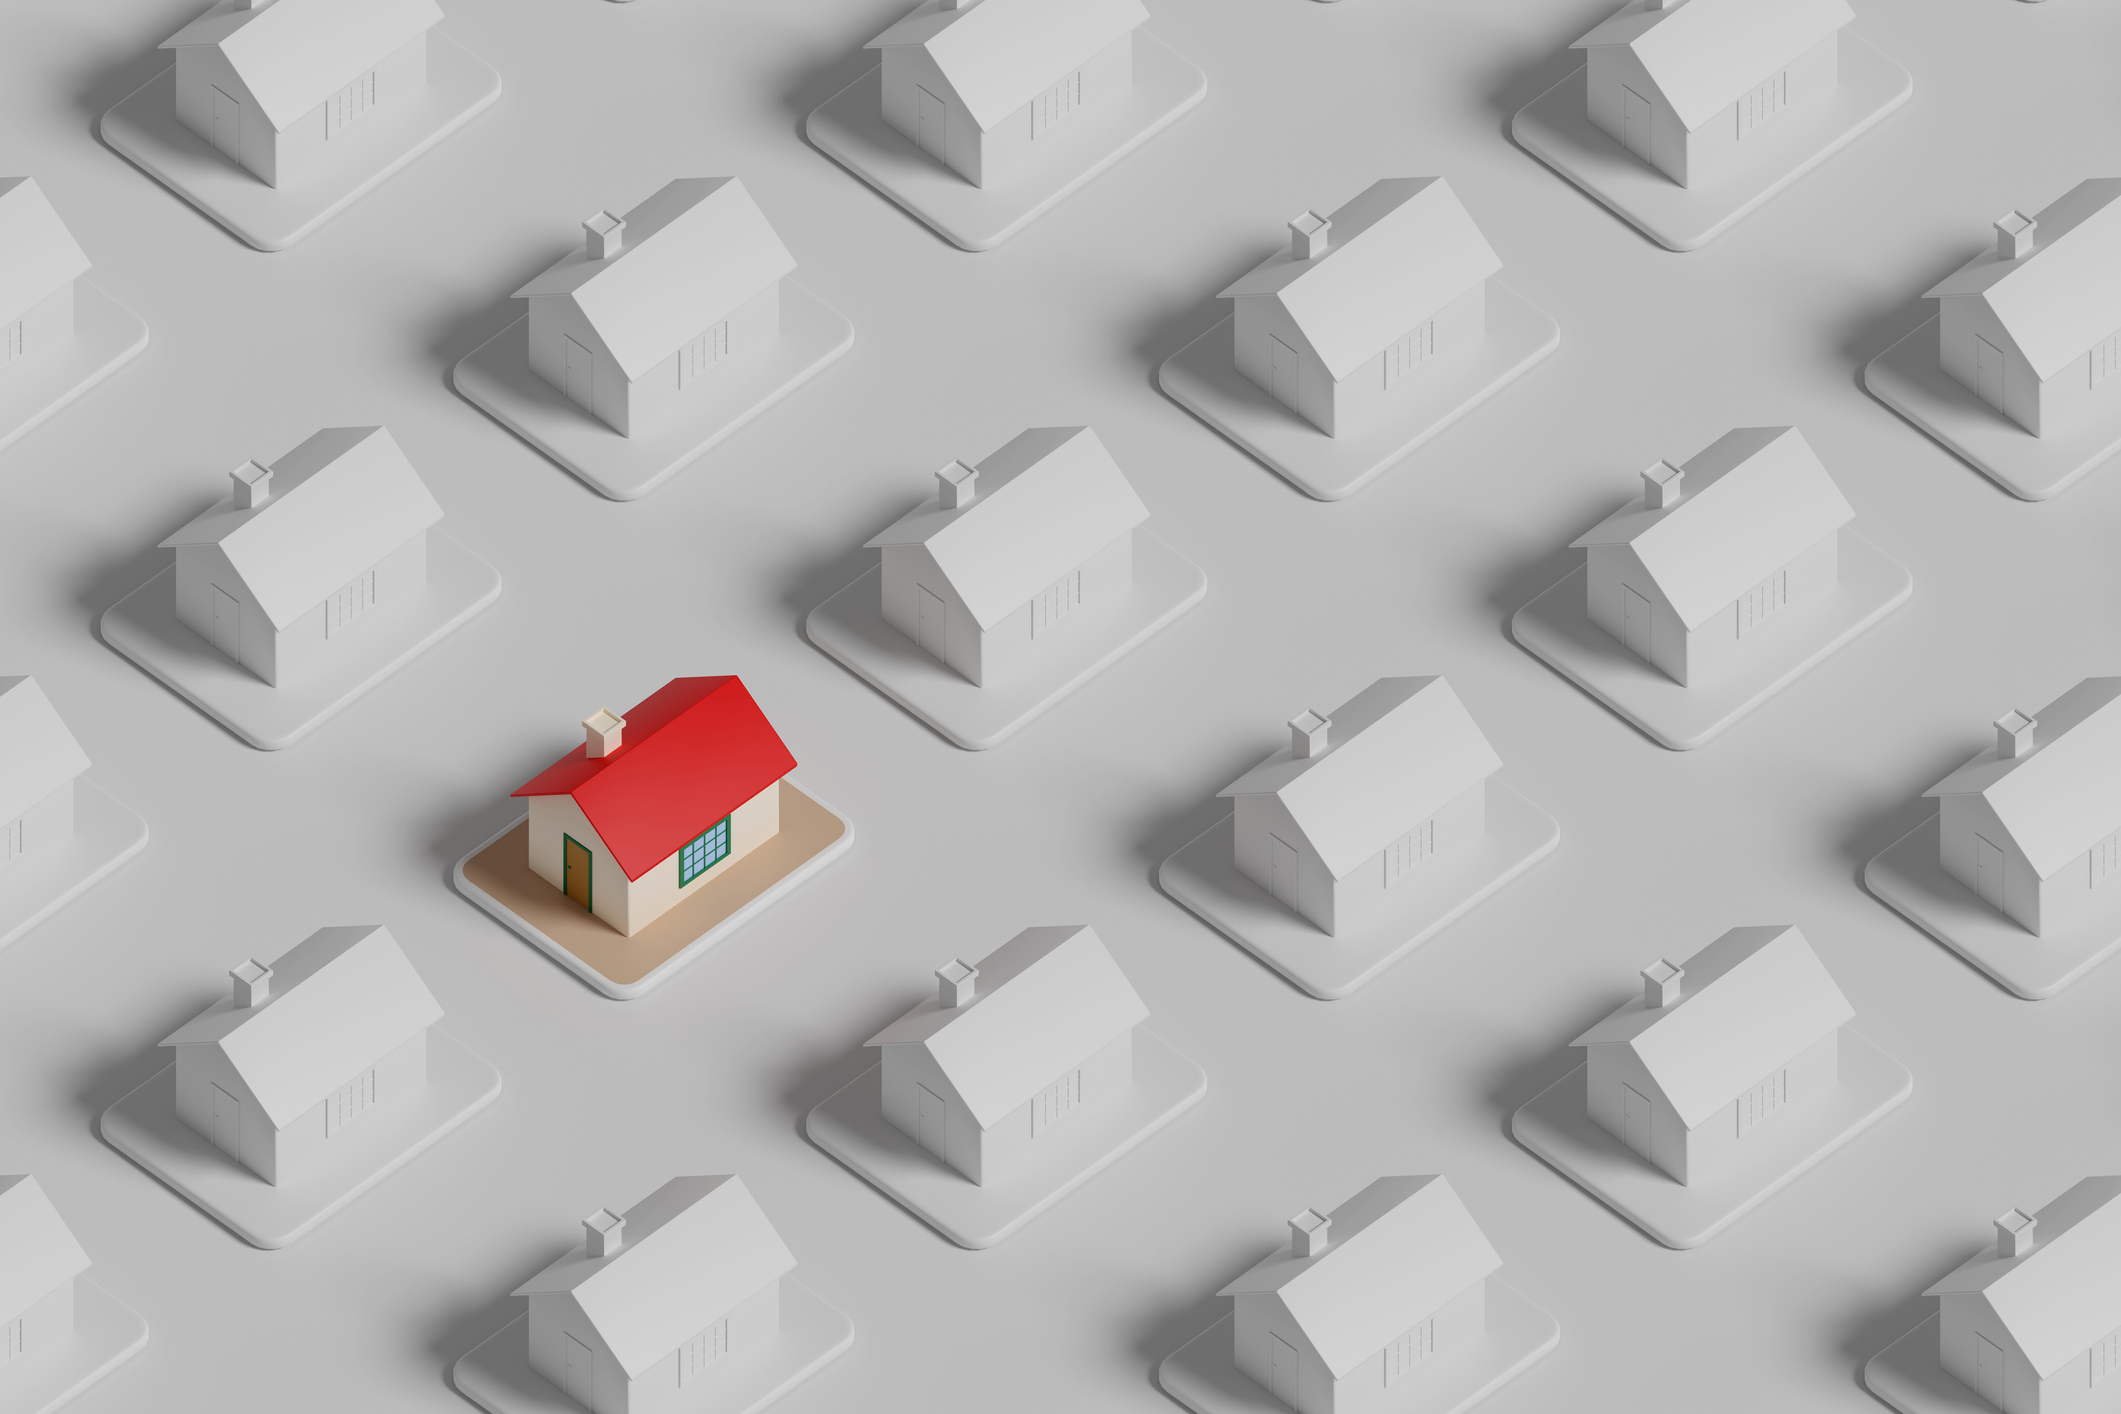 Isometric view of a colored house among many other white houses. Real estate concept. 3d illustration.